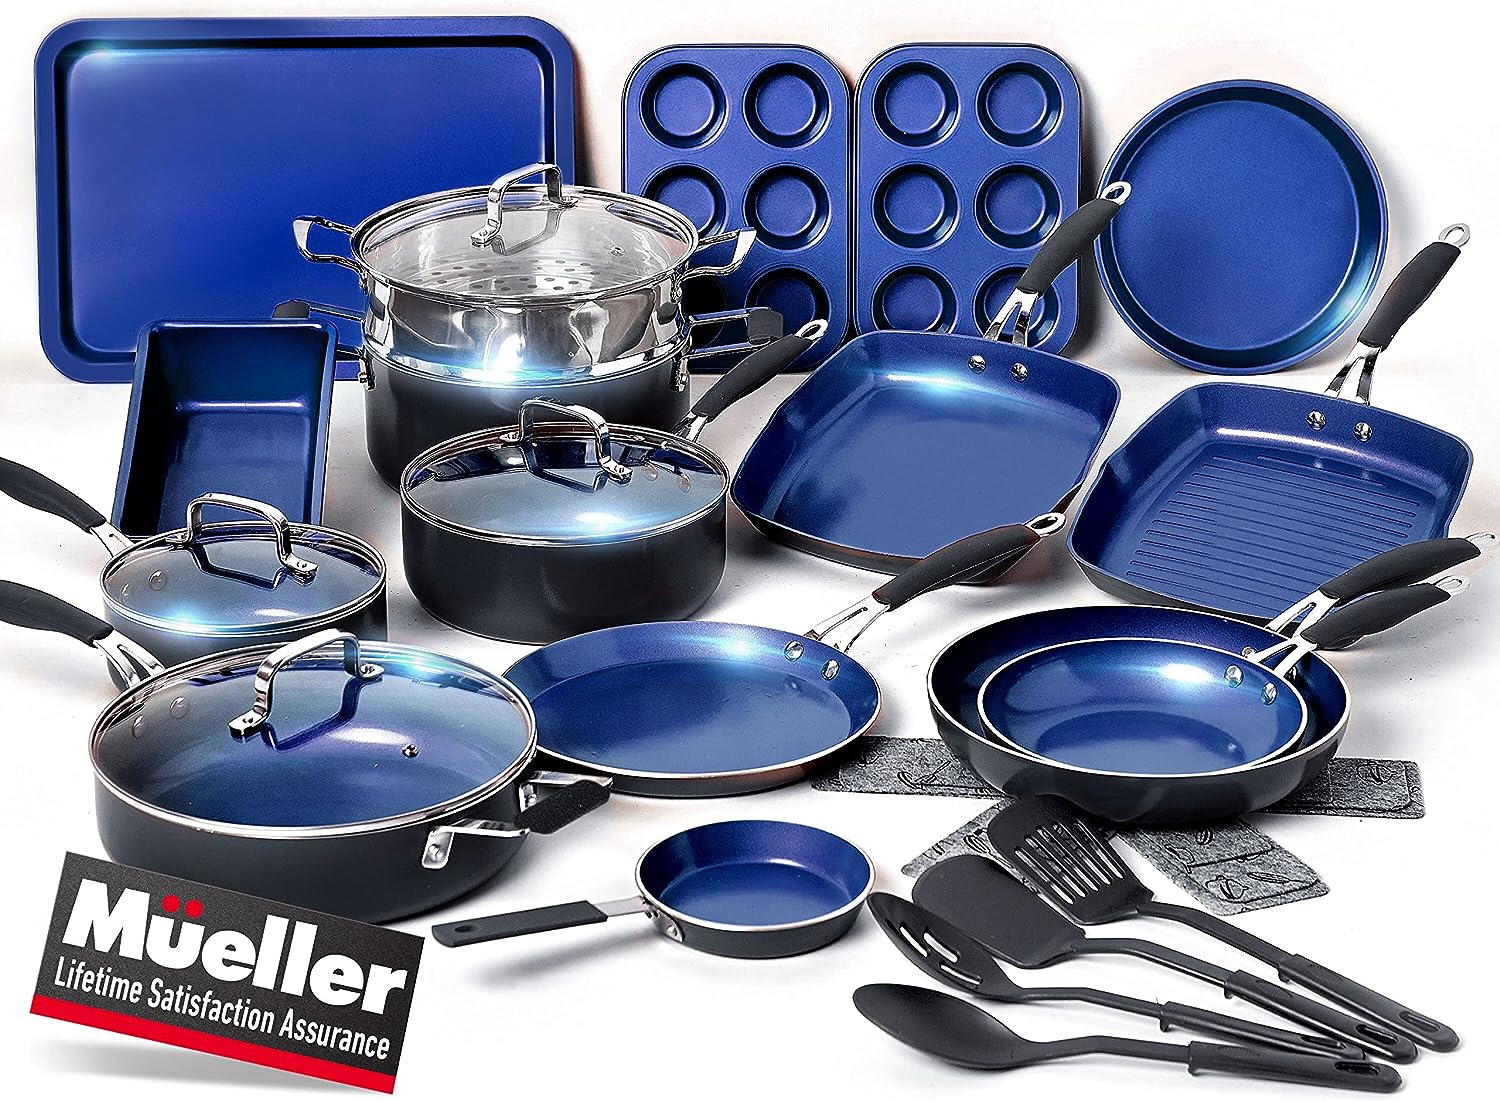 Mueller Sapphire UltraClad Kitchen Frying Pots and Pans Set 24pc Nonstick Induction Cooking Cookware Sets